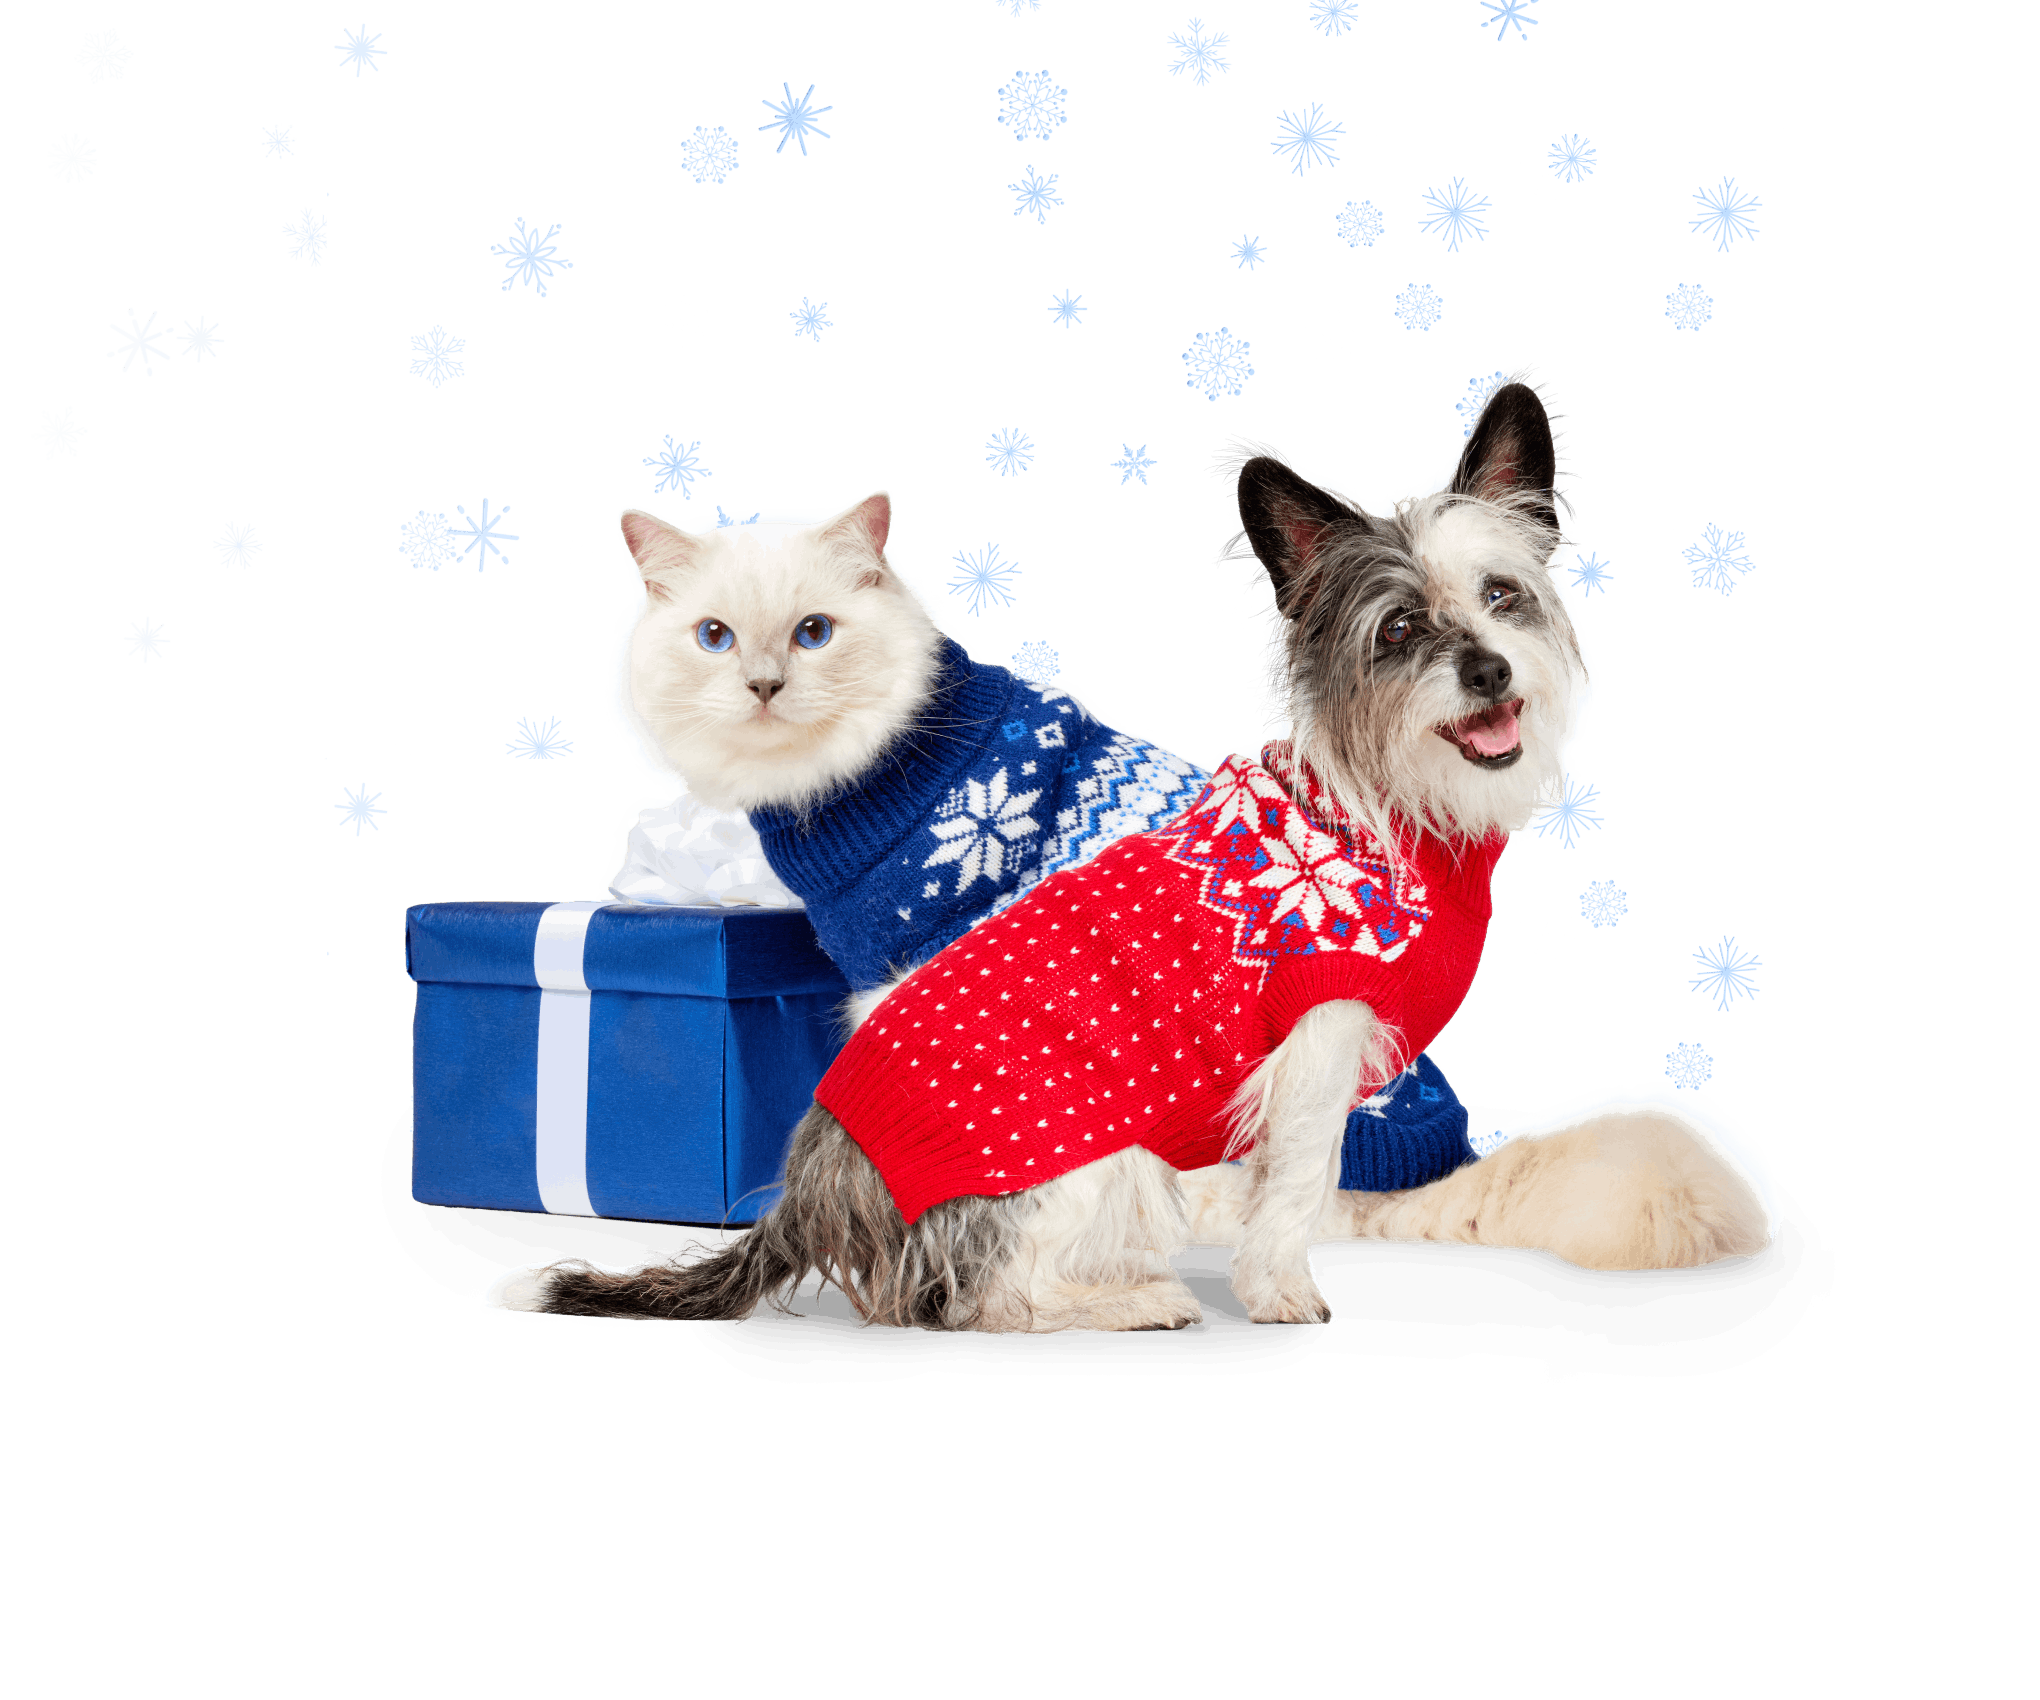 A dog and a cat in holiday sweaters next to a present box